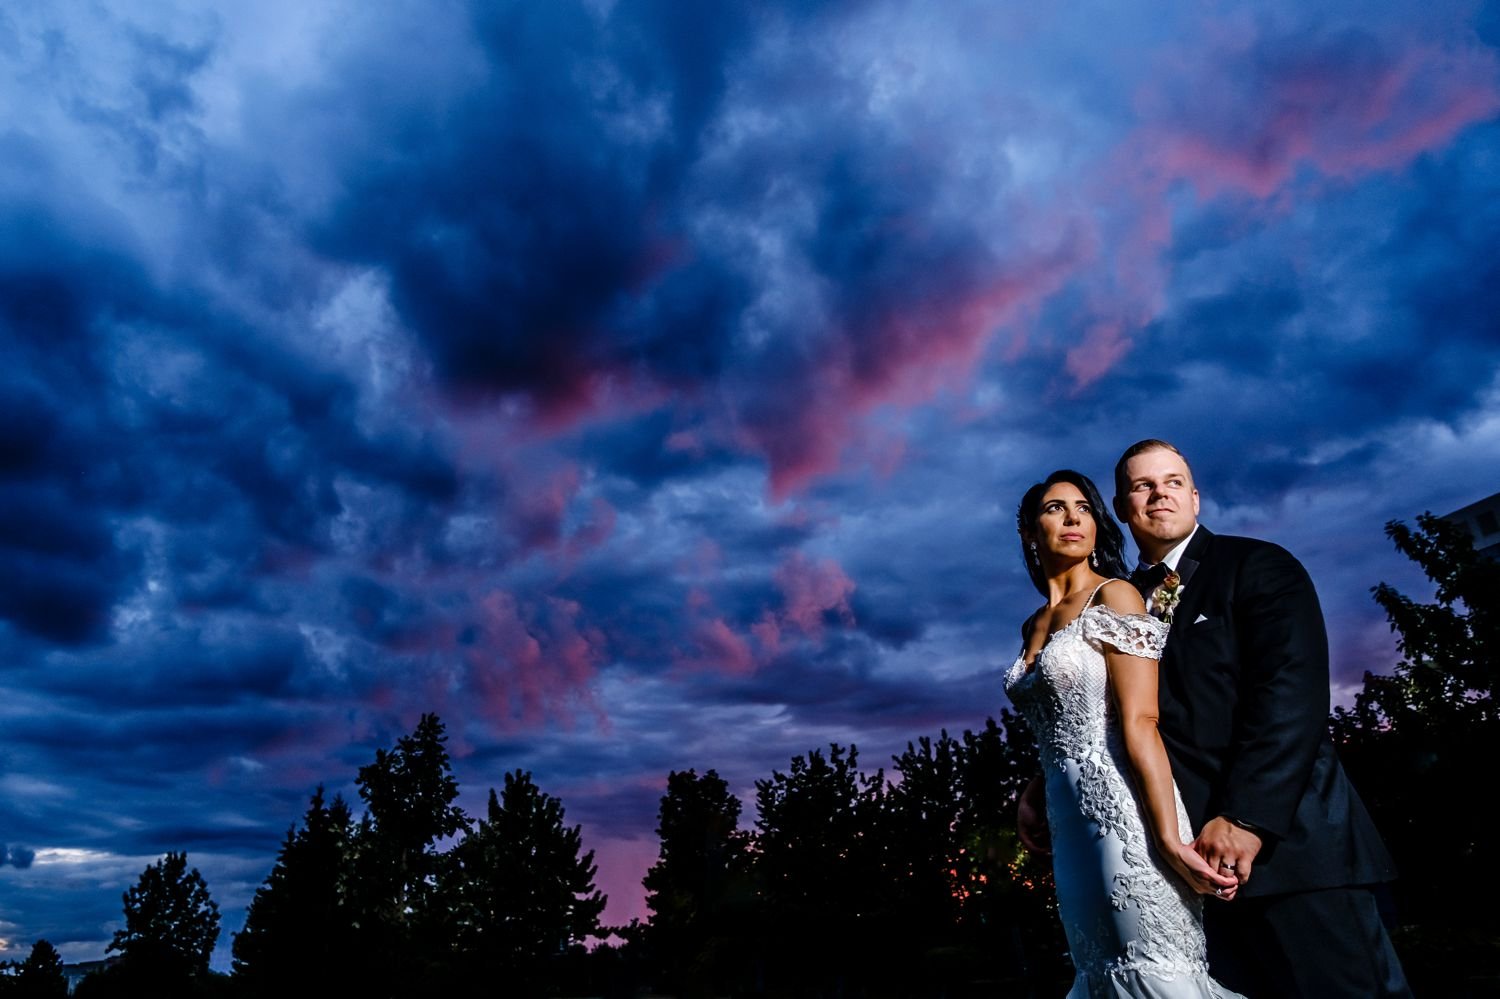 nighttime portrait of bride and groom at a brookstreet hotel wedding reception in kanata